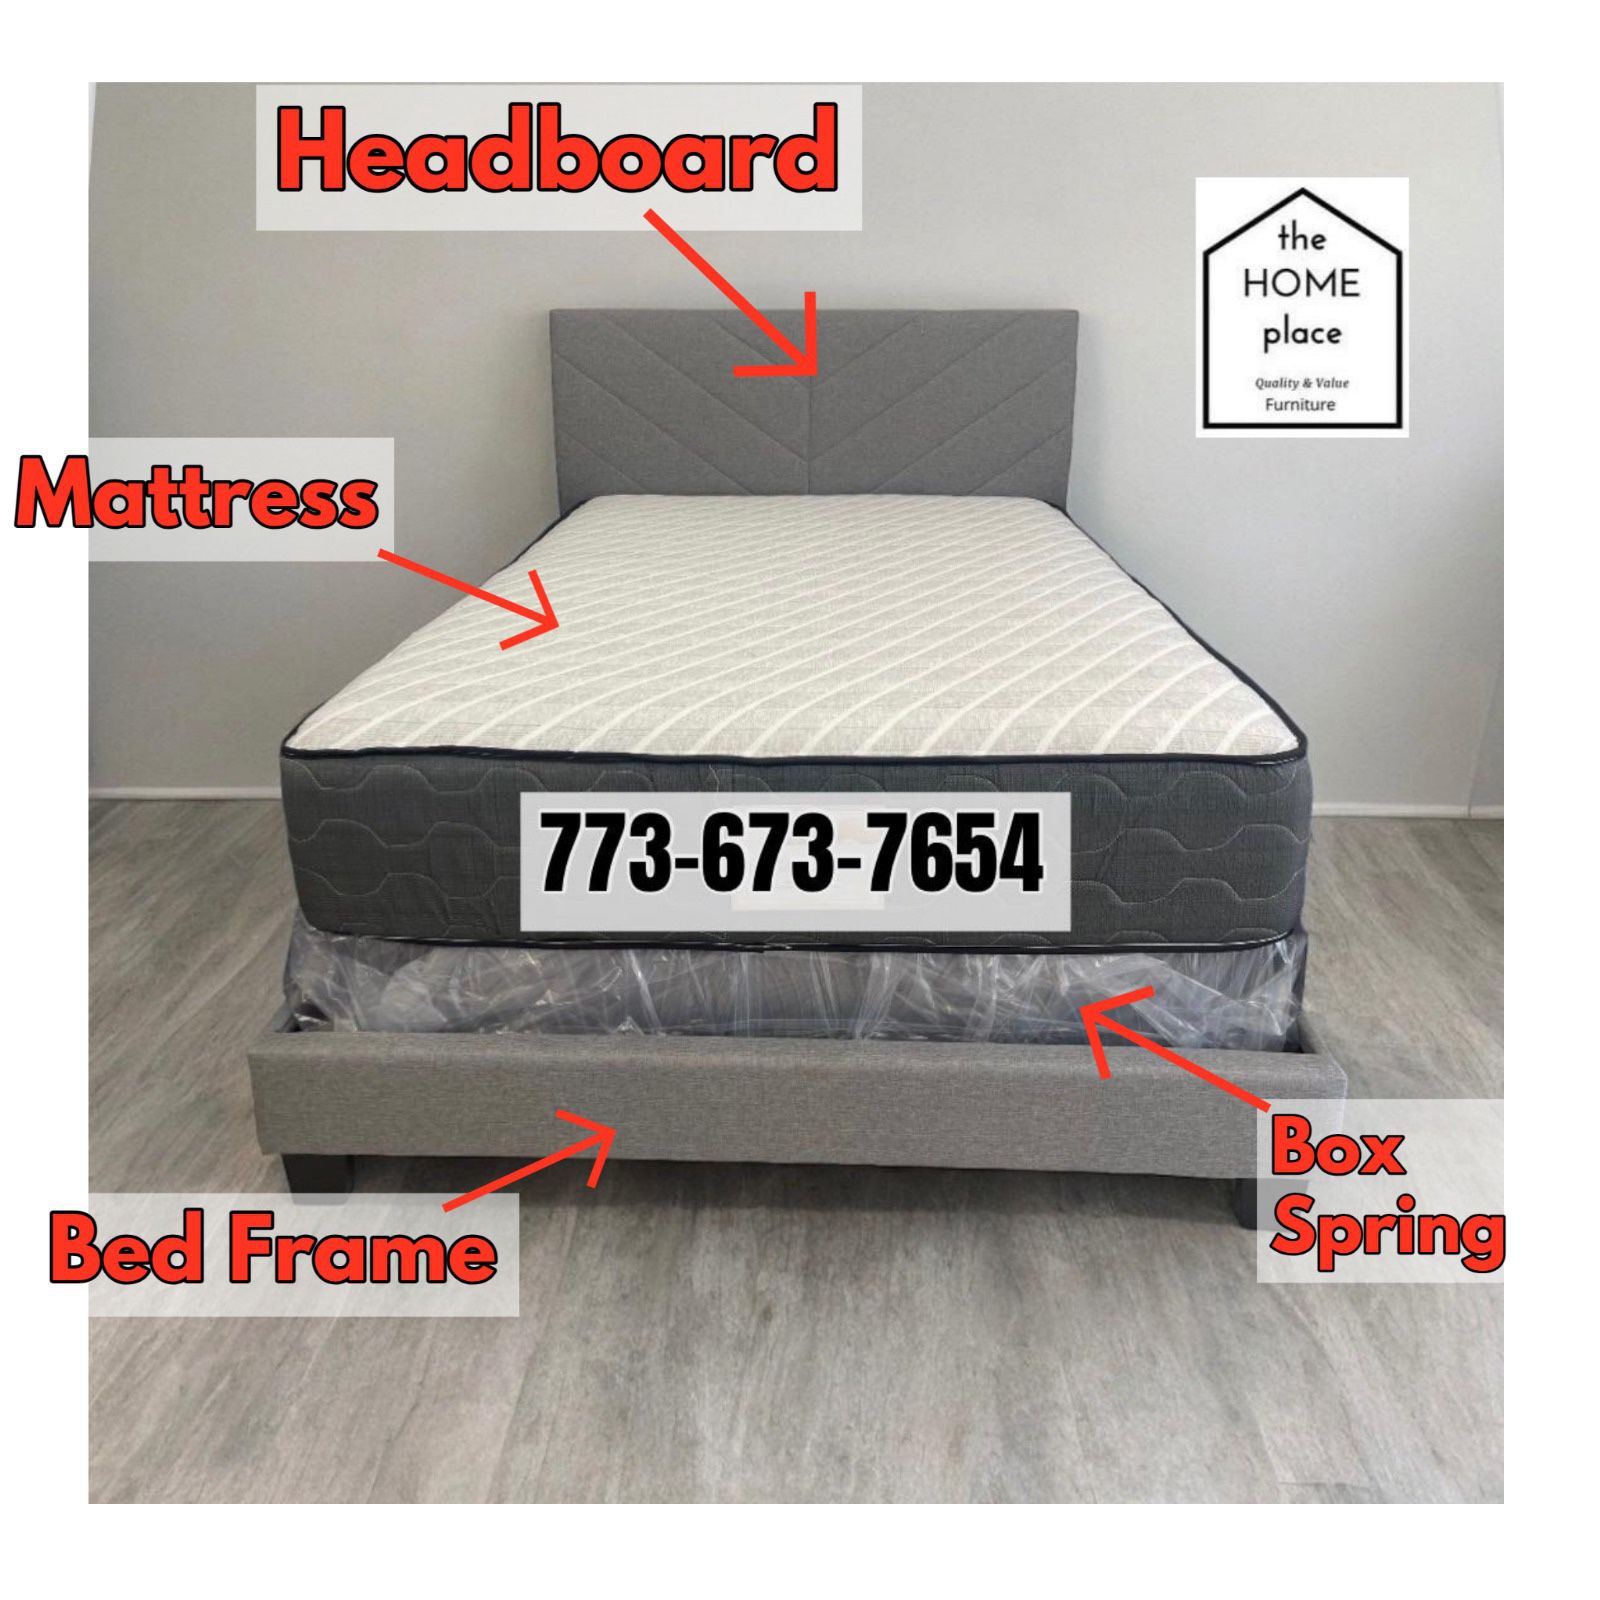 Comfy & Elegant Full Bed Frame 🚨 Includes Mattress & Box Spring for ONLY $319. Ready for Delivery Today 🚛